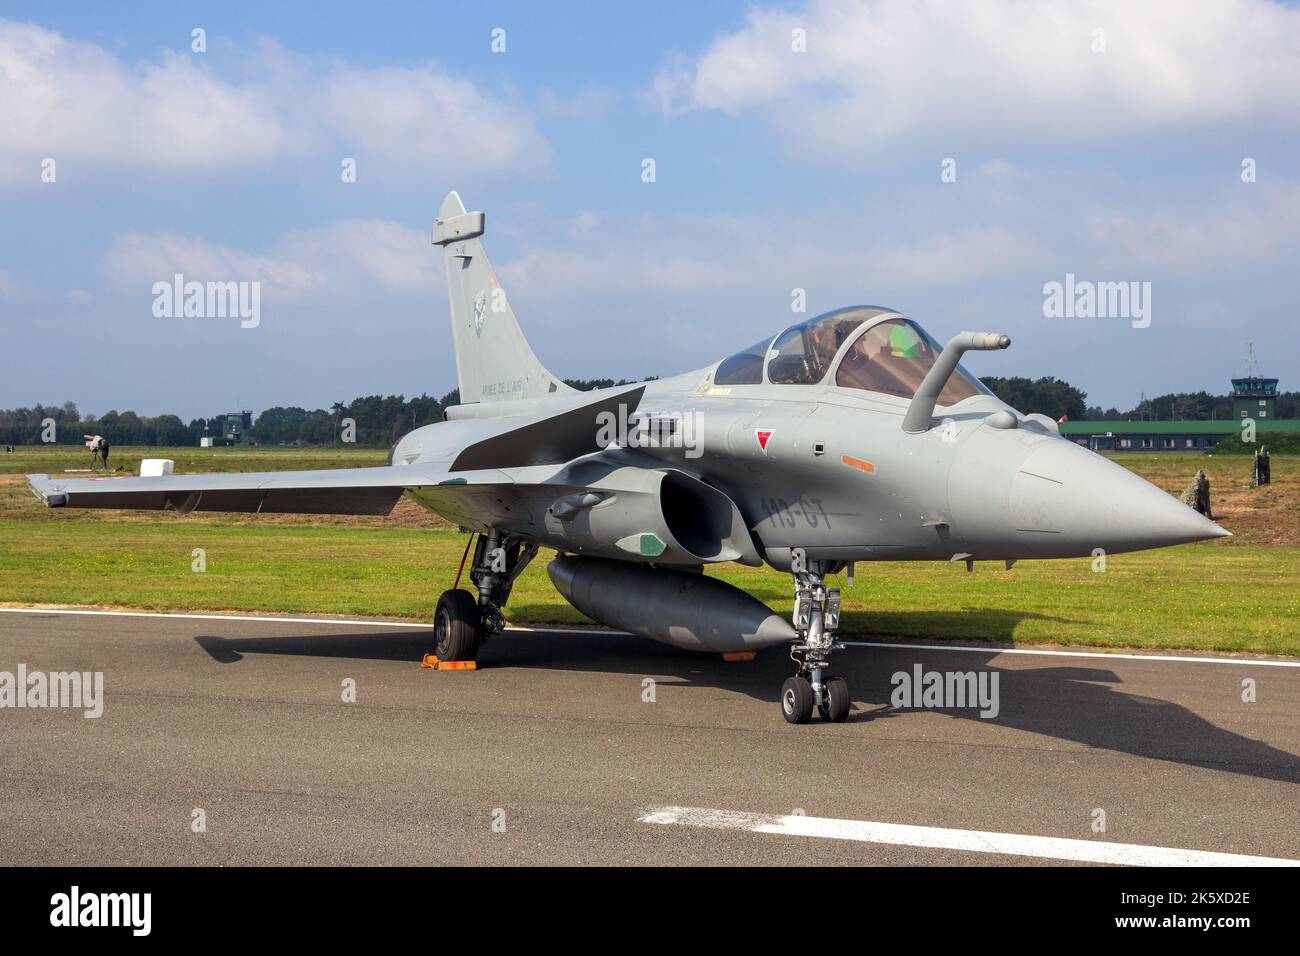 French Air Force Dassault Rafale fighter jet aircraft on the tarmac of Kleine-Brogel airbase, Belgium - September 13, 2014 Stock Photo